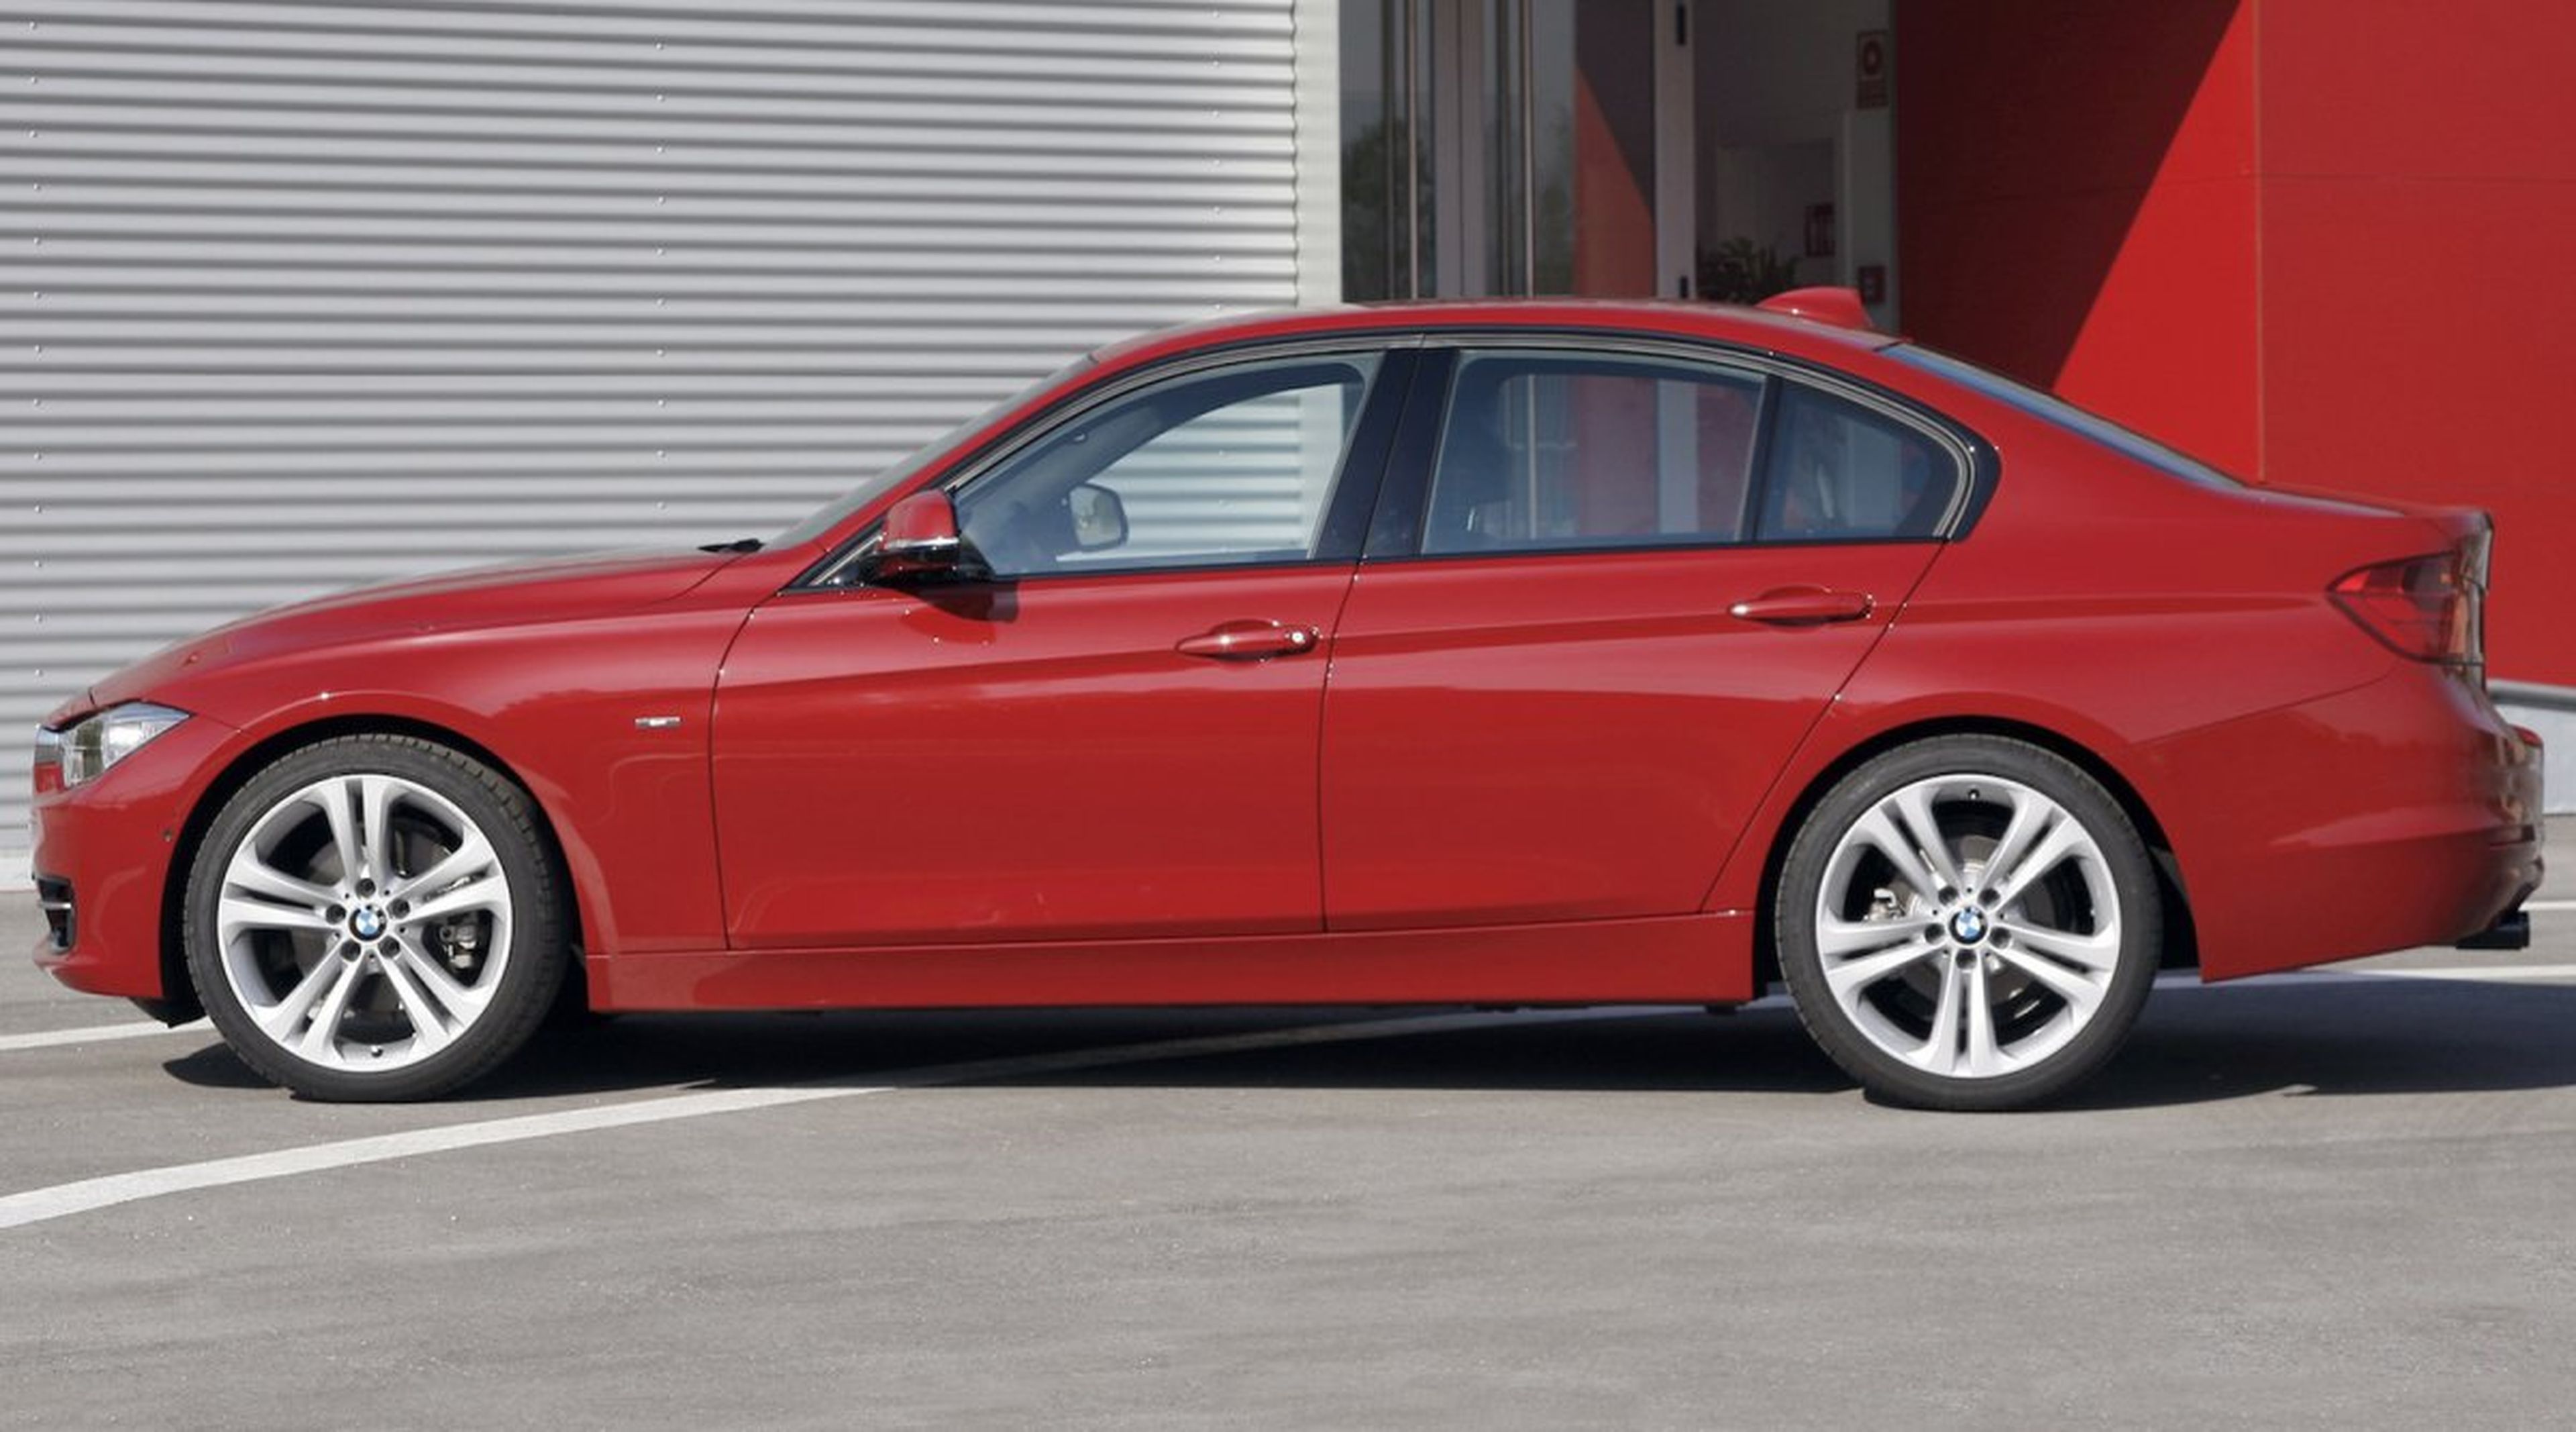 BMW 335d lateral